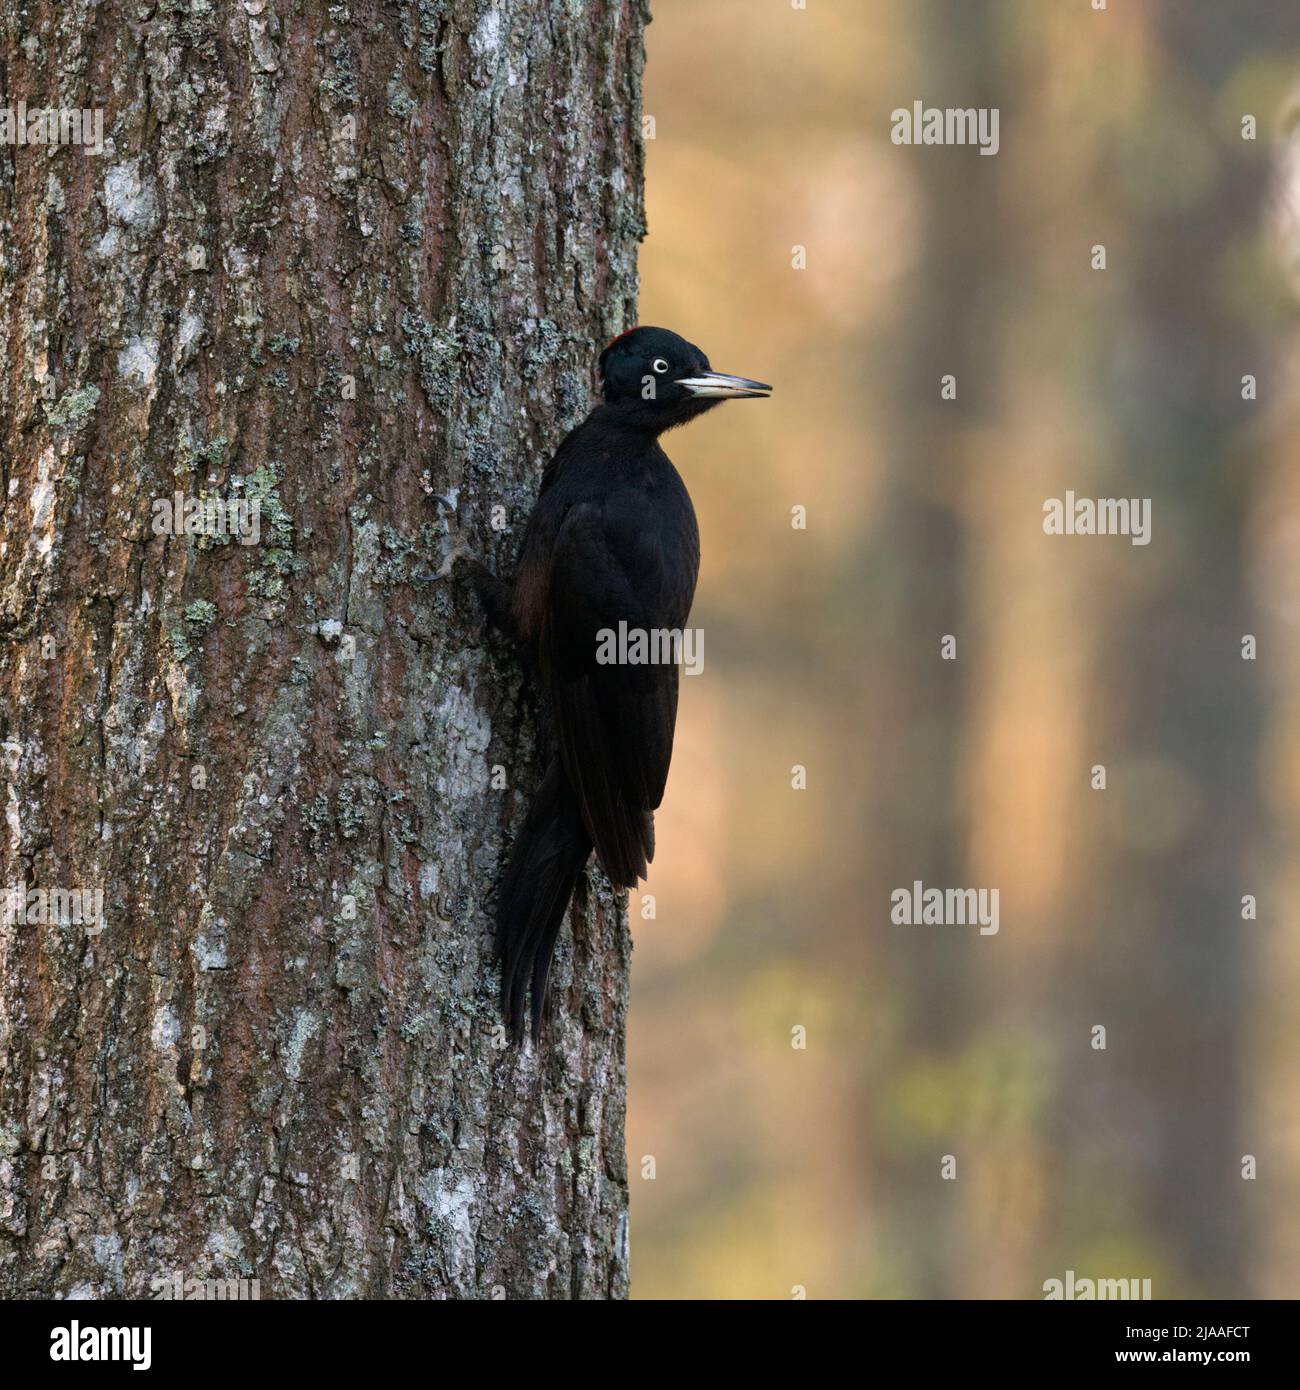 Black Woodpecker / Schwarzspecht ( Dryocopus martius ), adult female, perched on a tree trunk, turning its head, watching around, typical attentive po Stock Photo